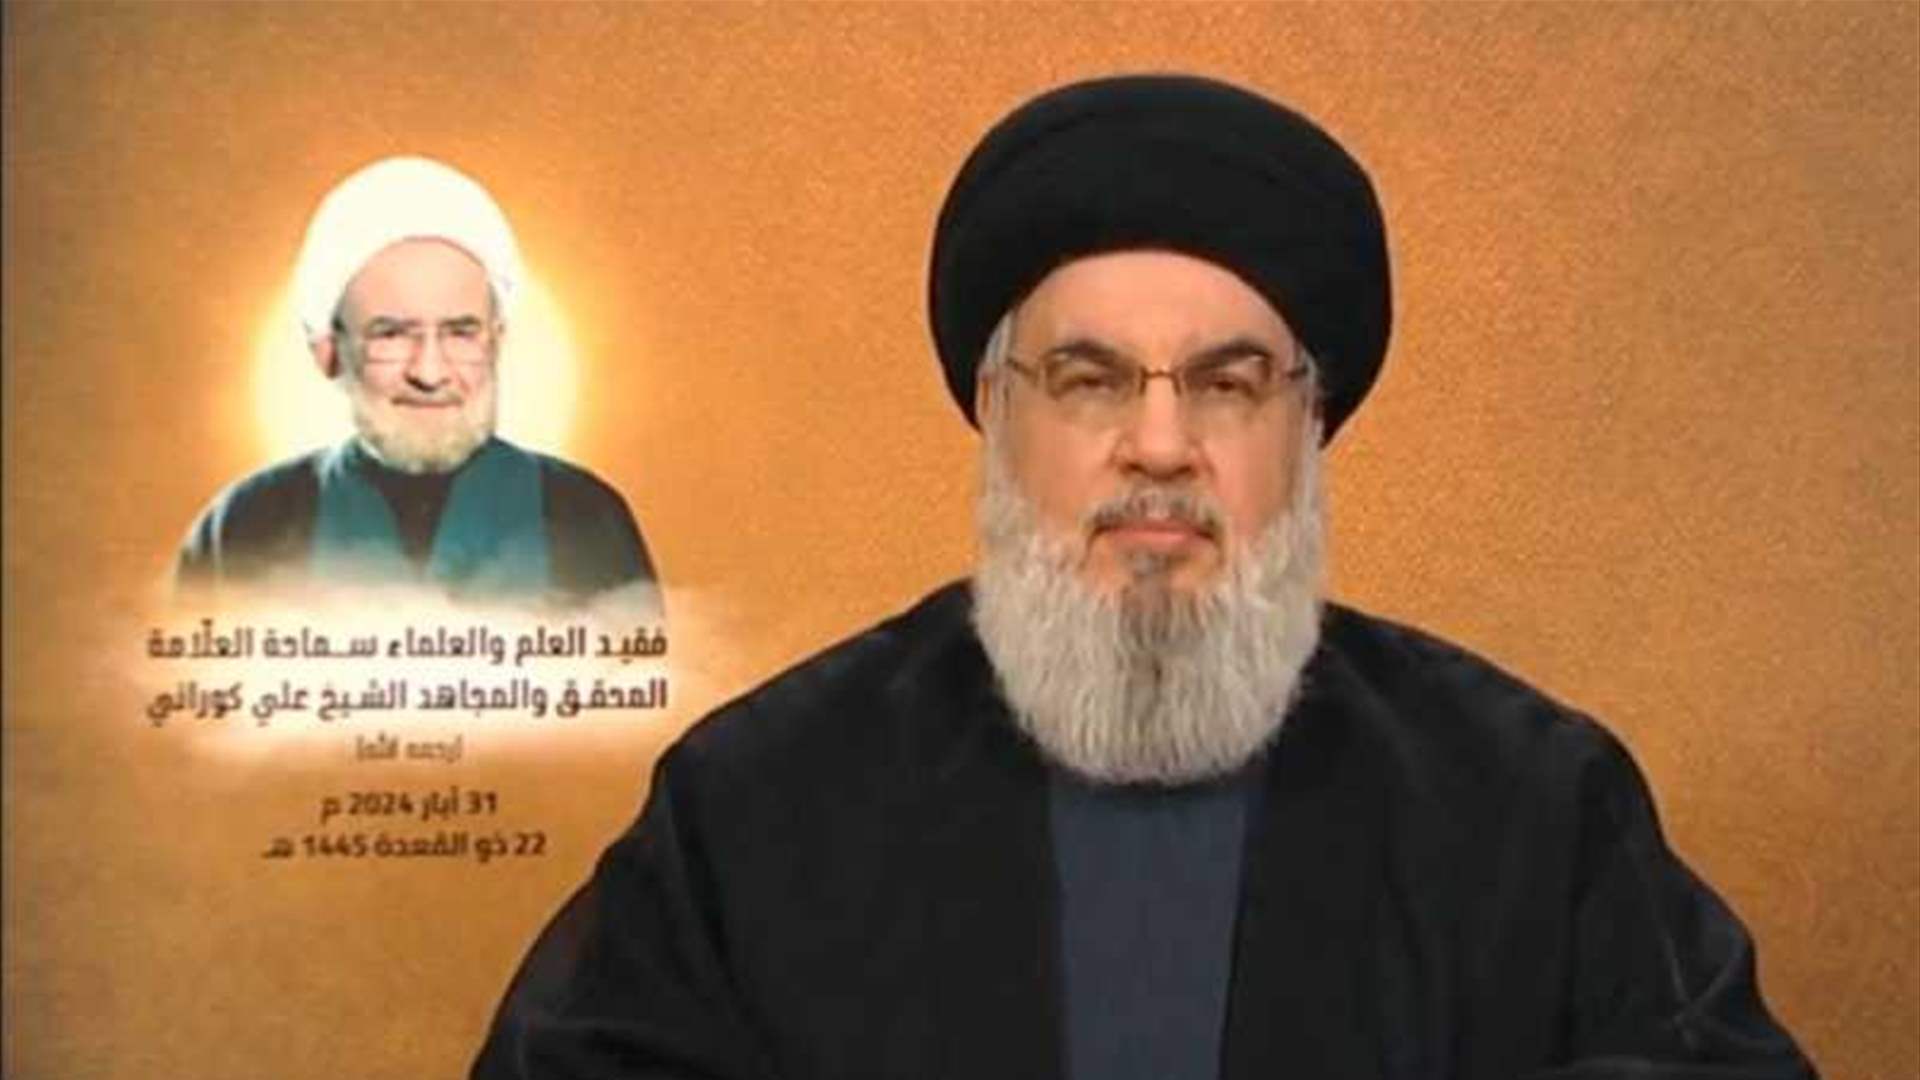 Hezbollah&#39;s Nasrallah: This is an existential battle, crucial for both Palestine and Lebanon&#39;s future